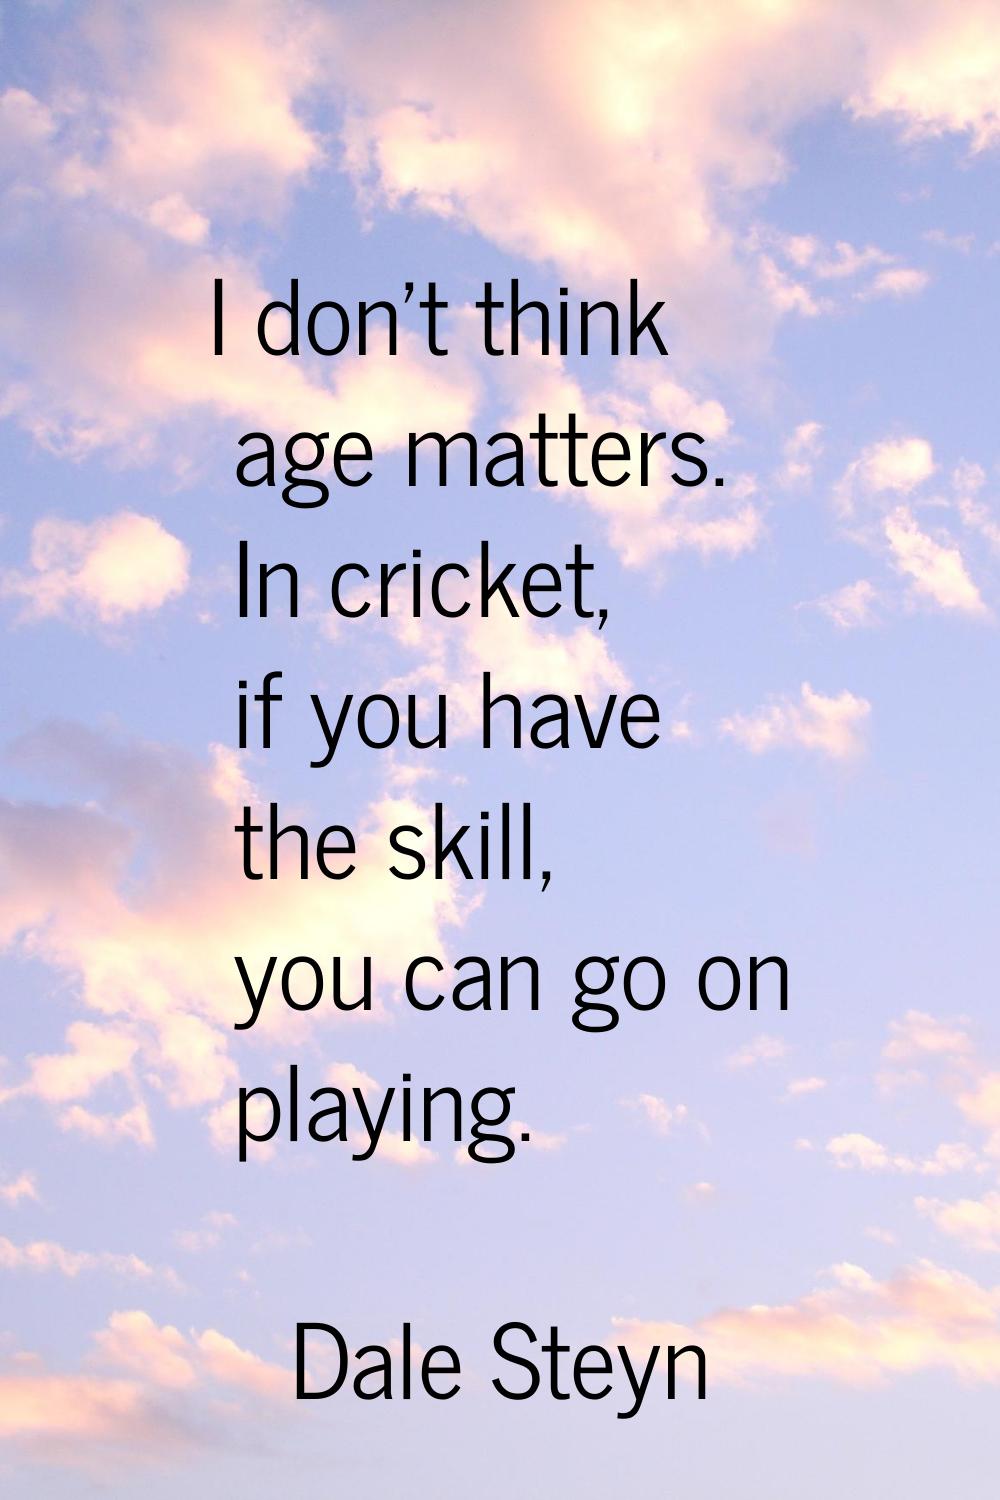 I don't think age matters. In cricket, if you have the skill, you can go on playing.